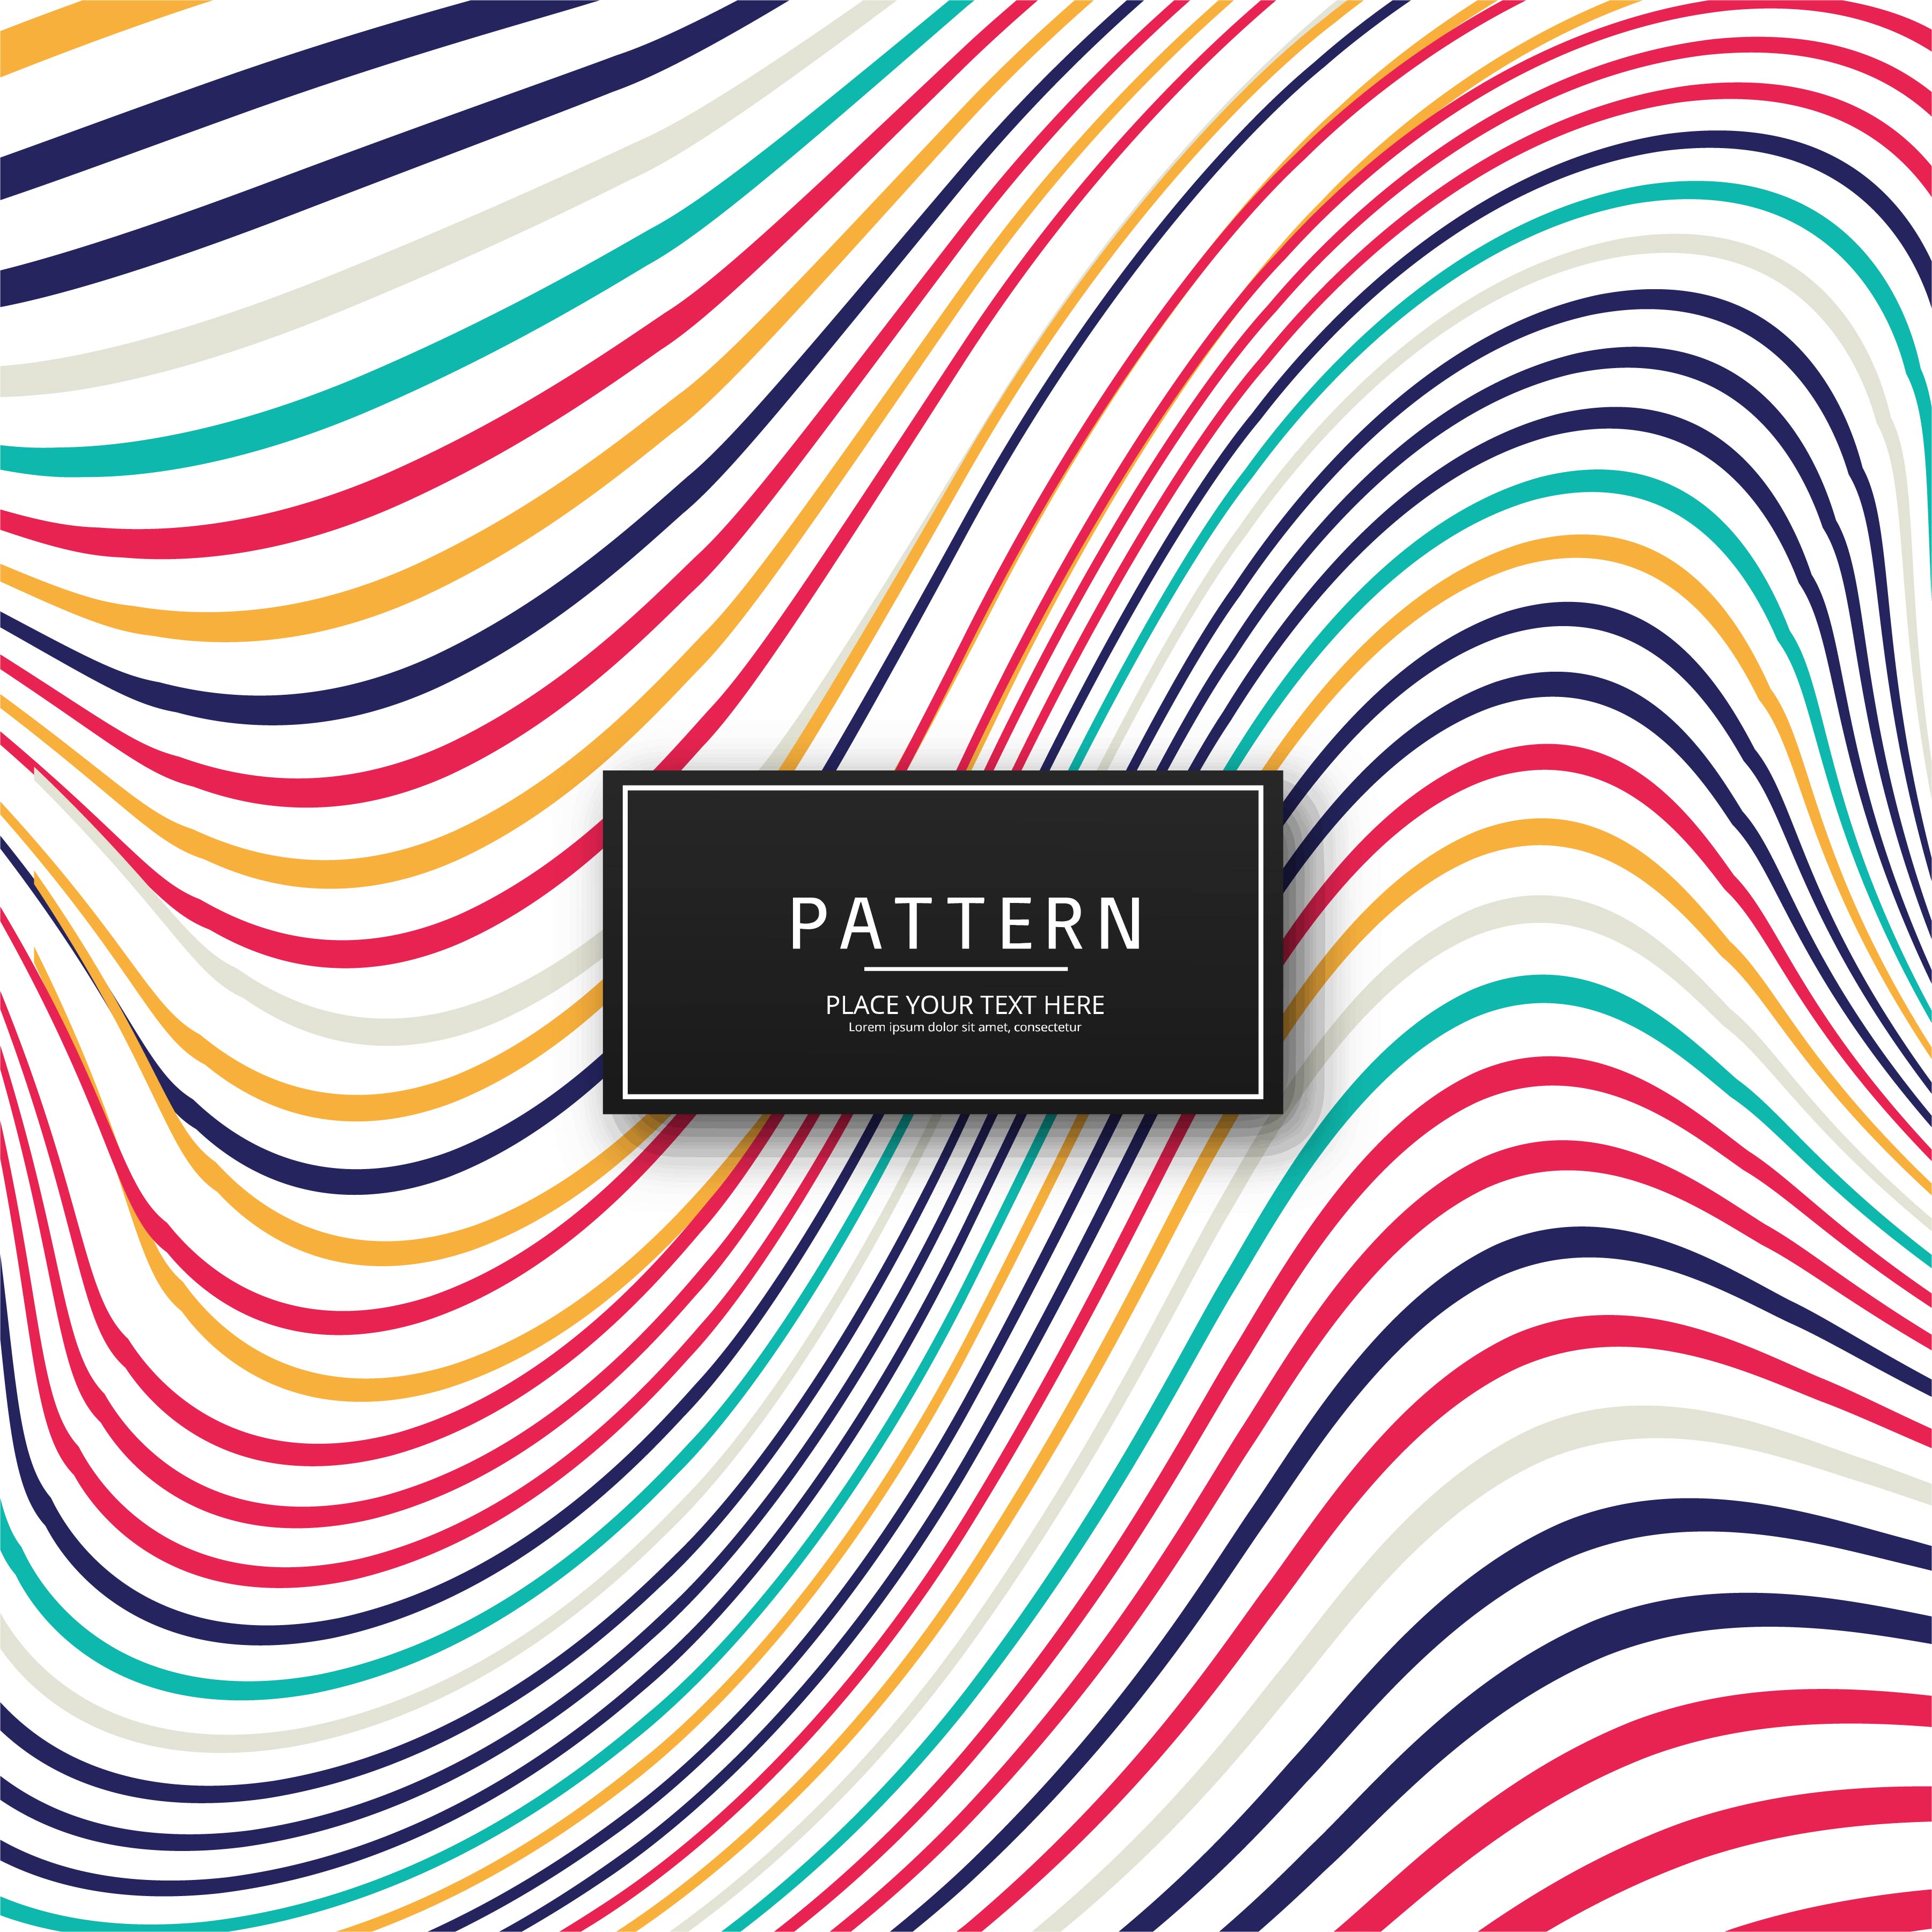  Abstract  colorful stylish lines  background 241573 